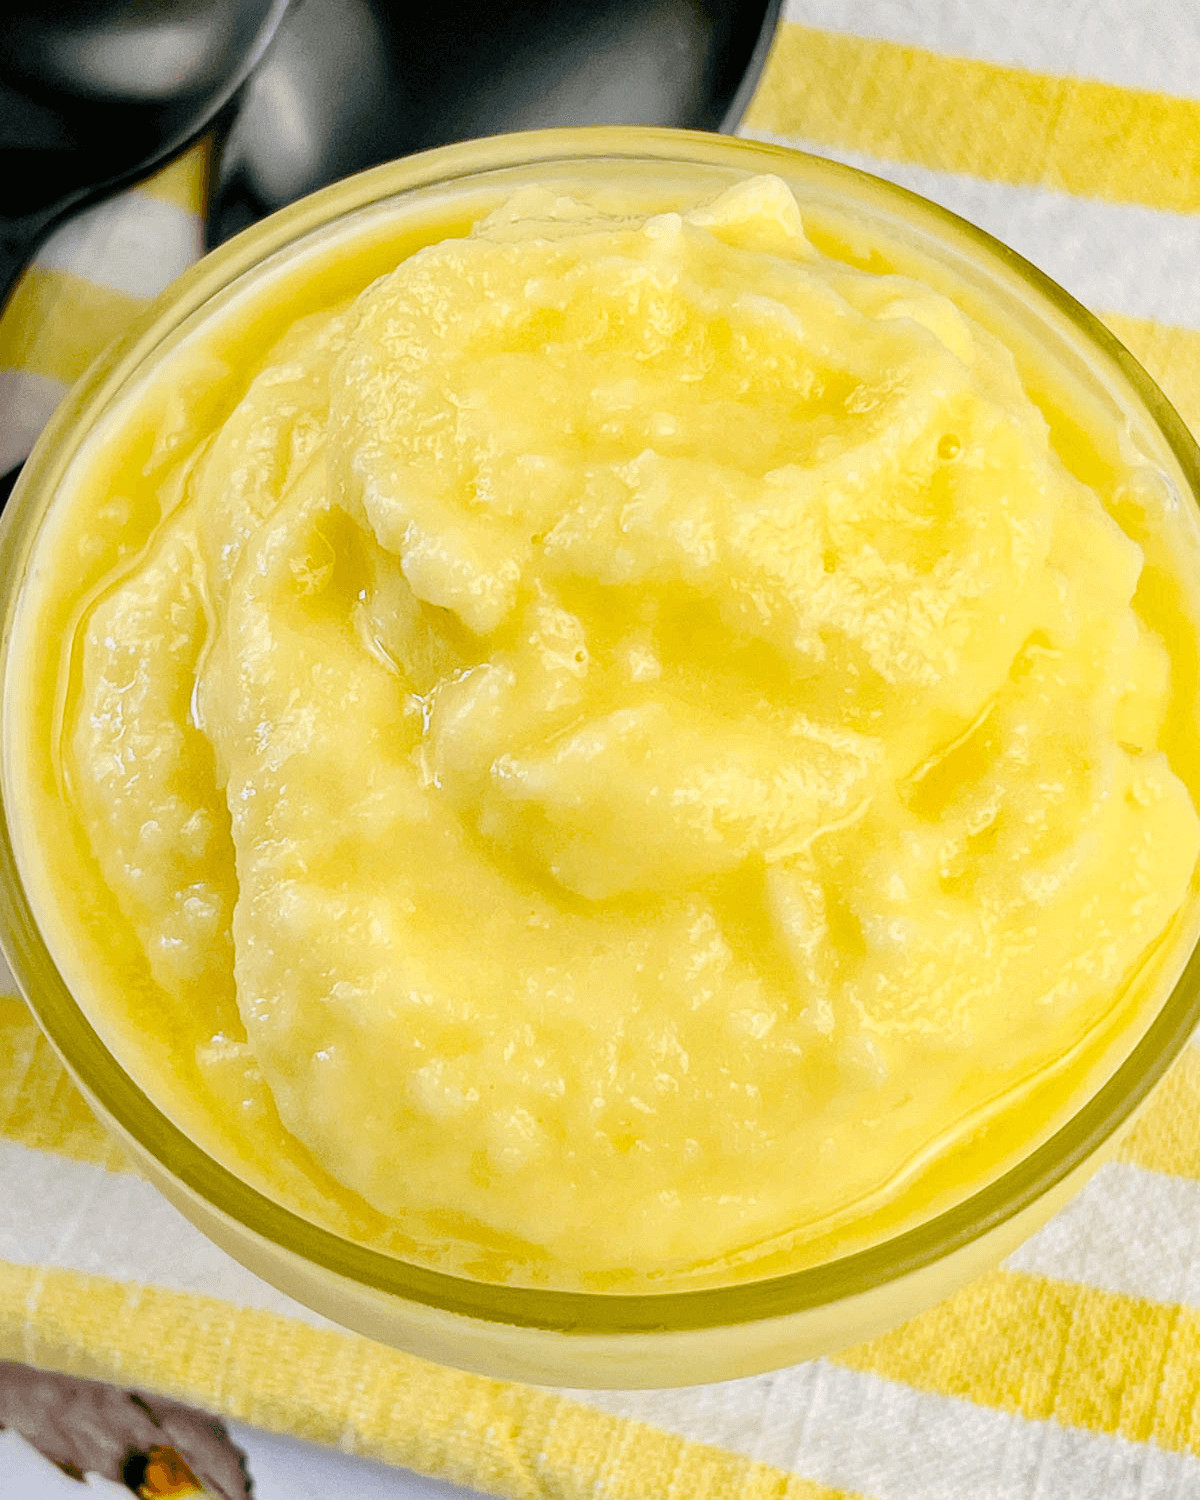 A clear glass dish of Dole Pineapple whip.